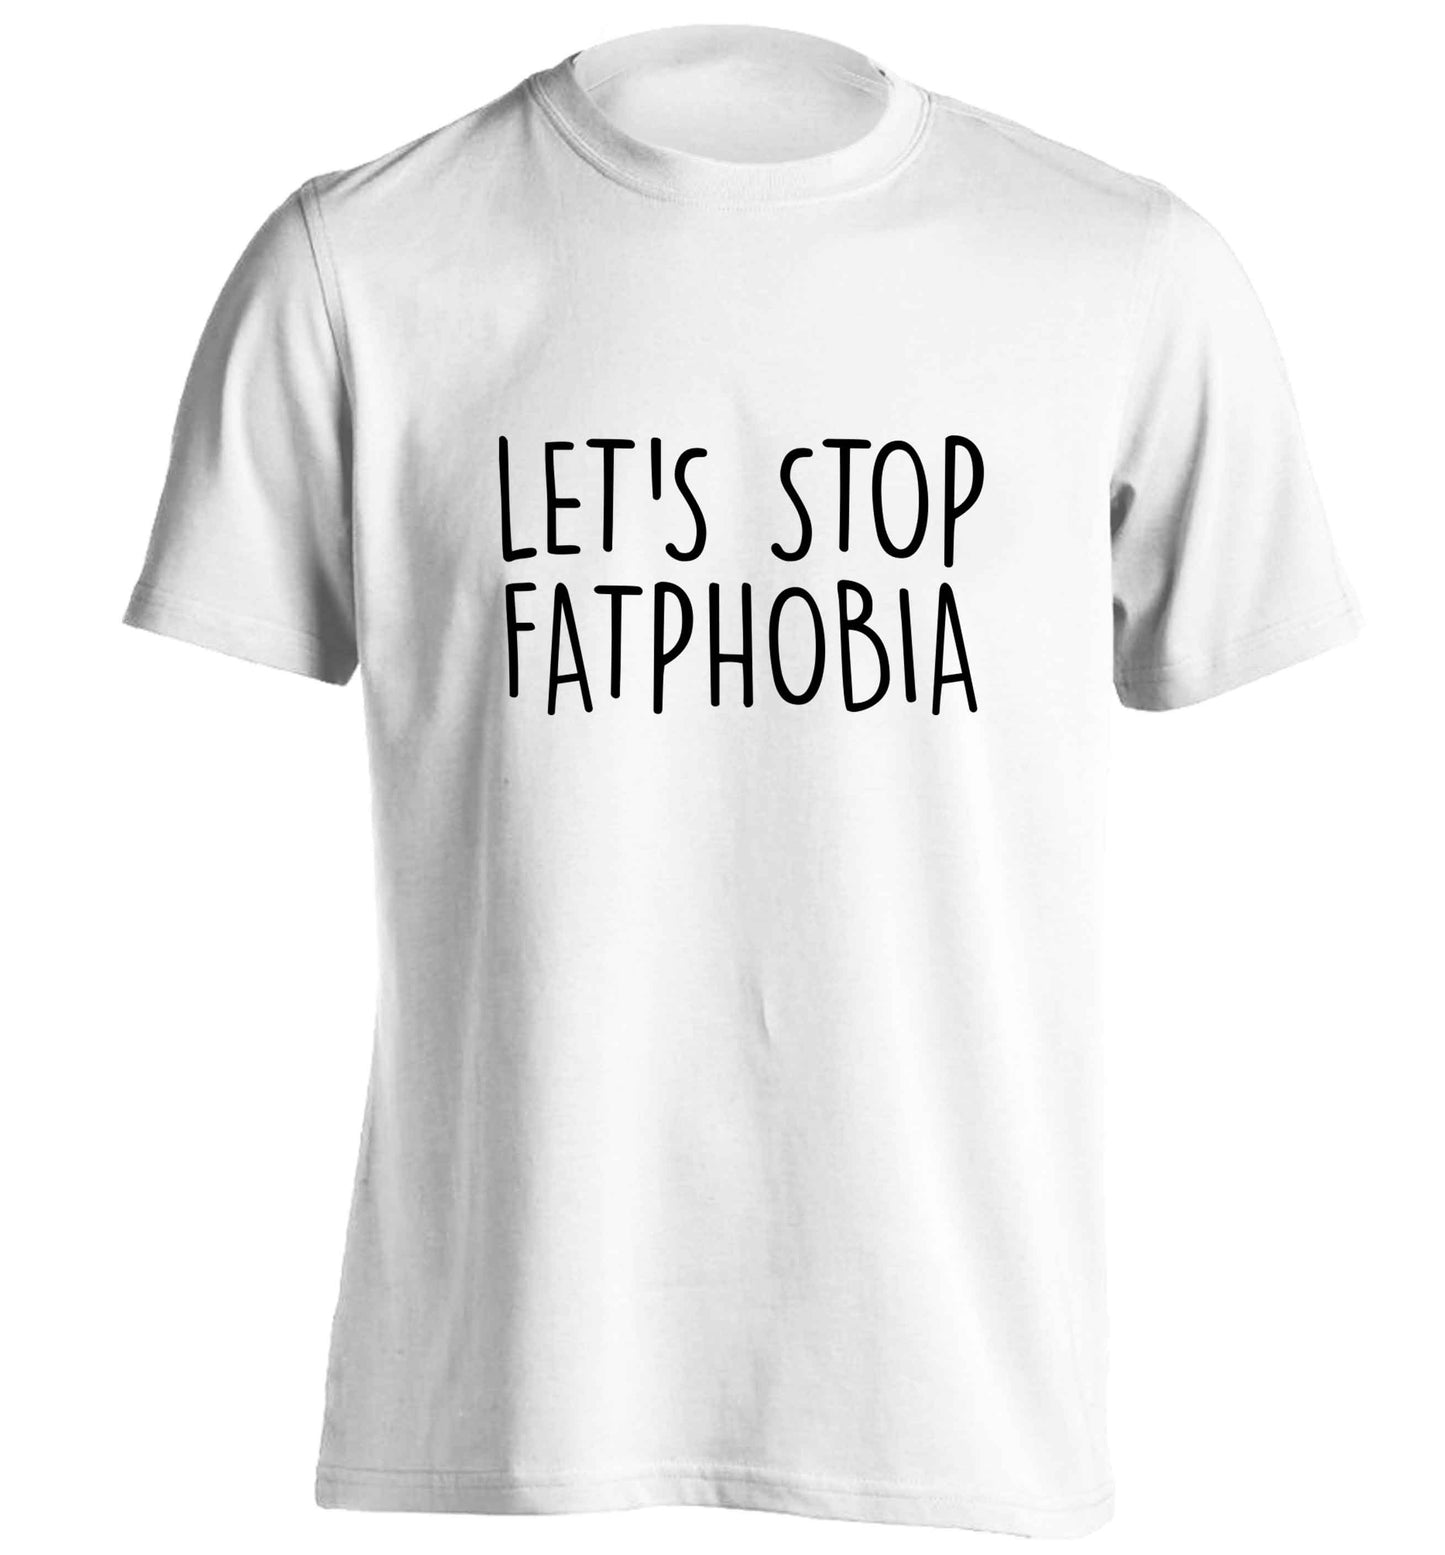 Let's stop fatphobia adults unisex white Tshirt 2XL